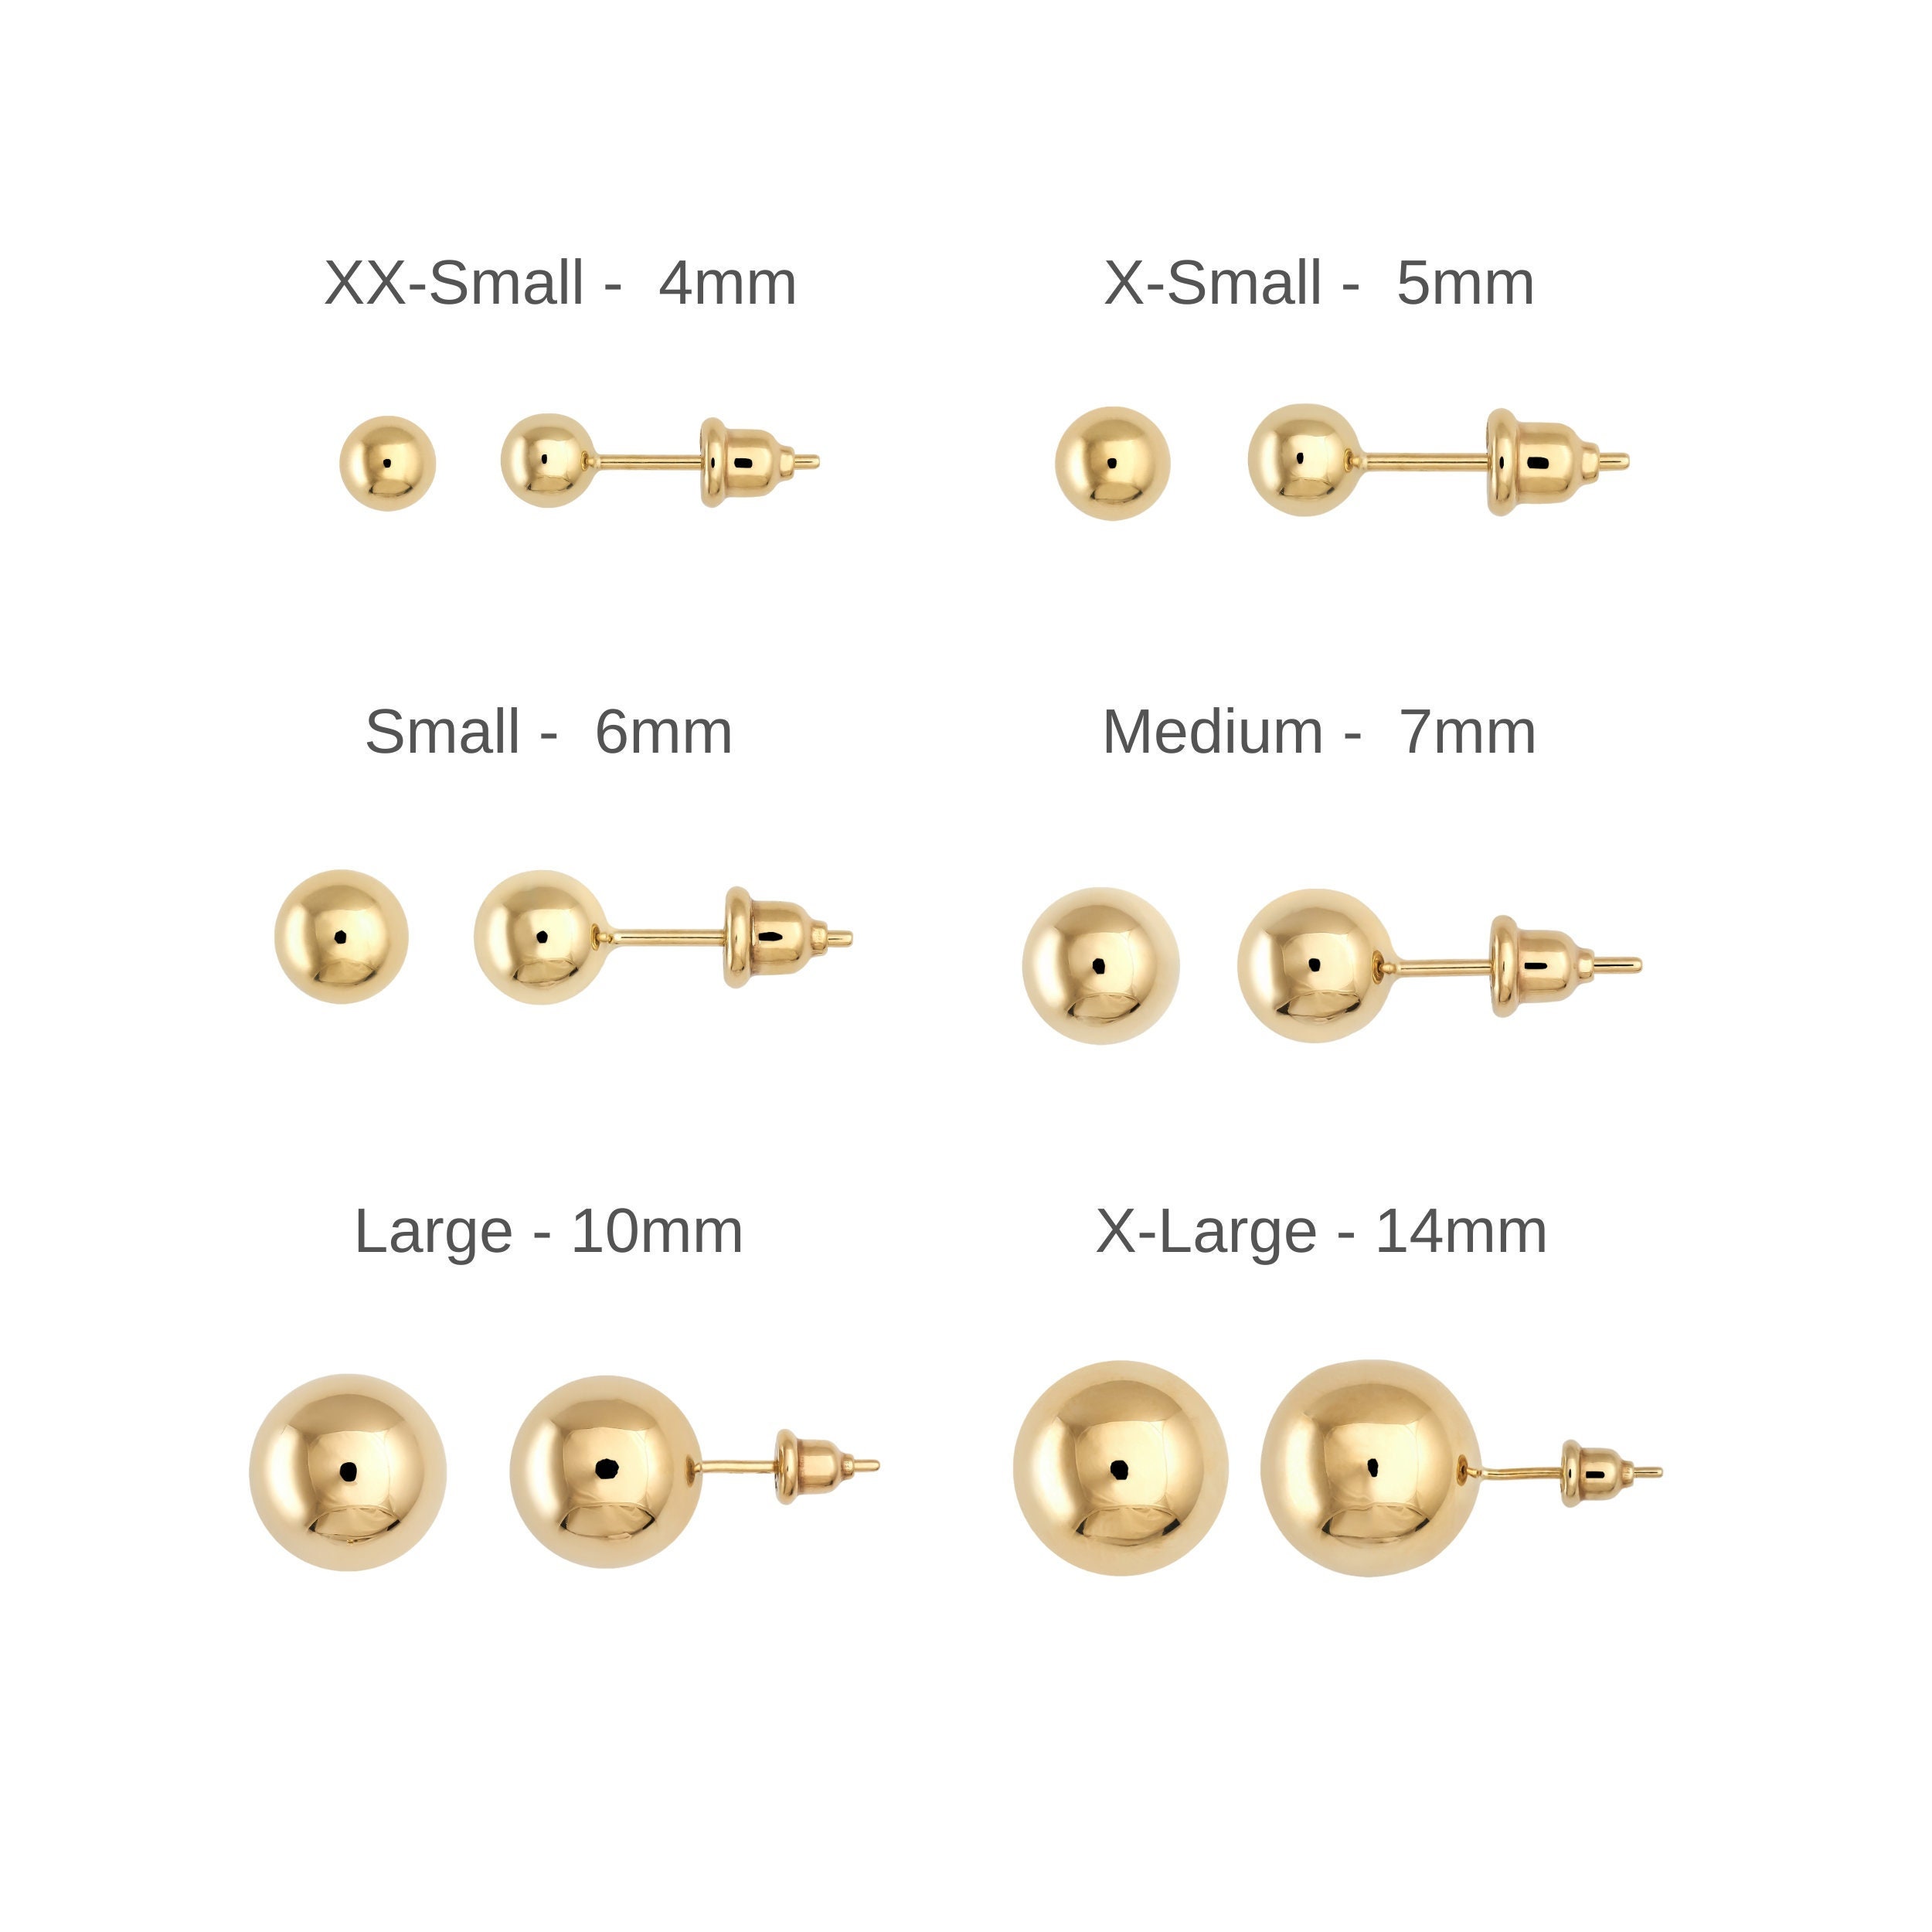 4mm Gold Plated BALL POST Earrings w/Loop